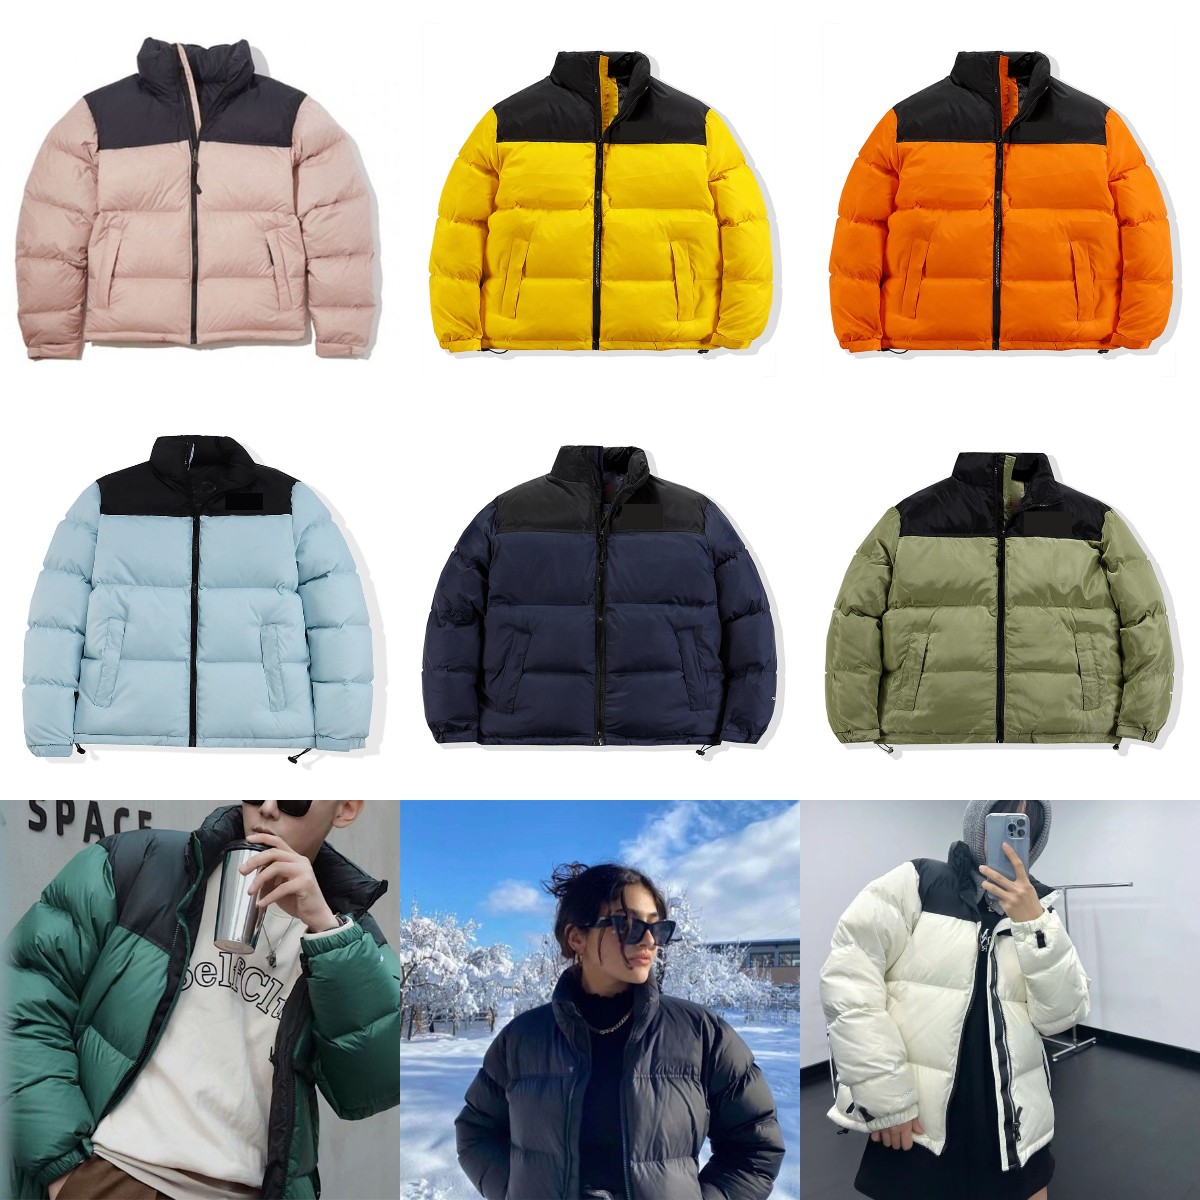 

designer puffer jacket mens down jacket winter warm coats Womens Cotton Outdoor Windbreaker Parka Windproof fluffy clothes north faced jacket, Customize